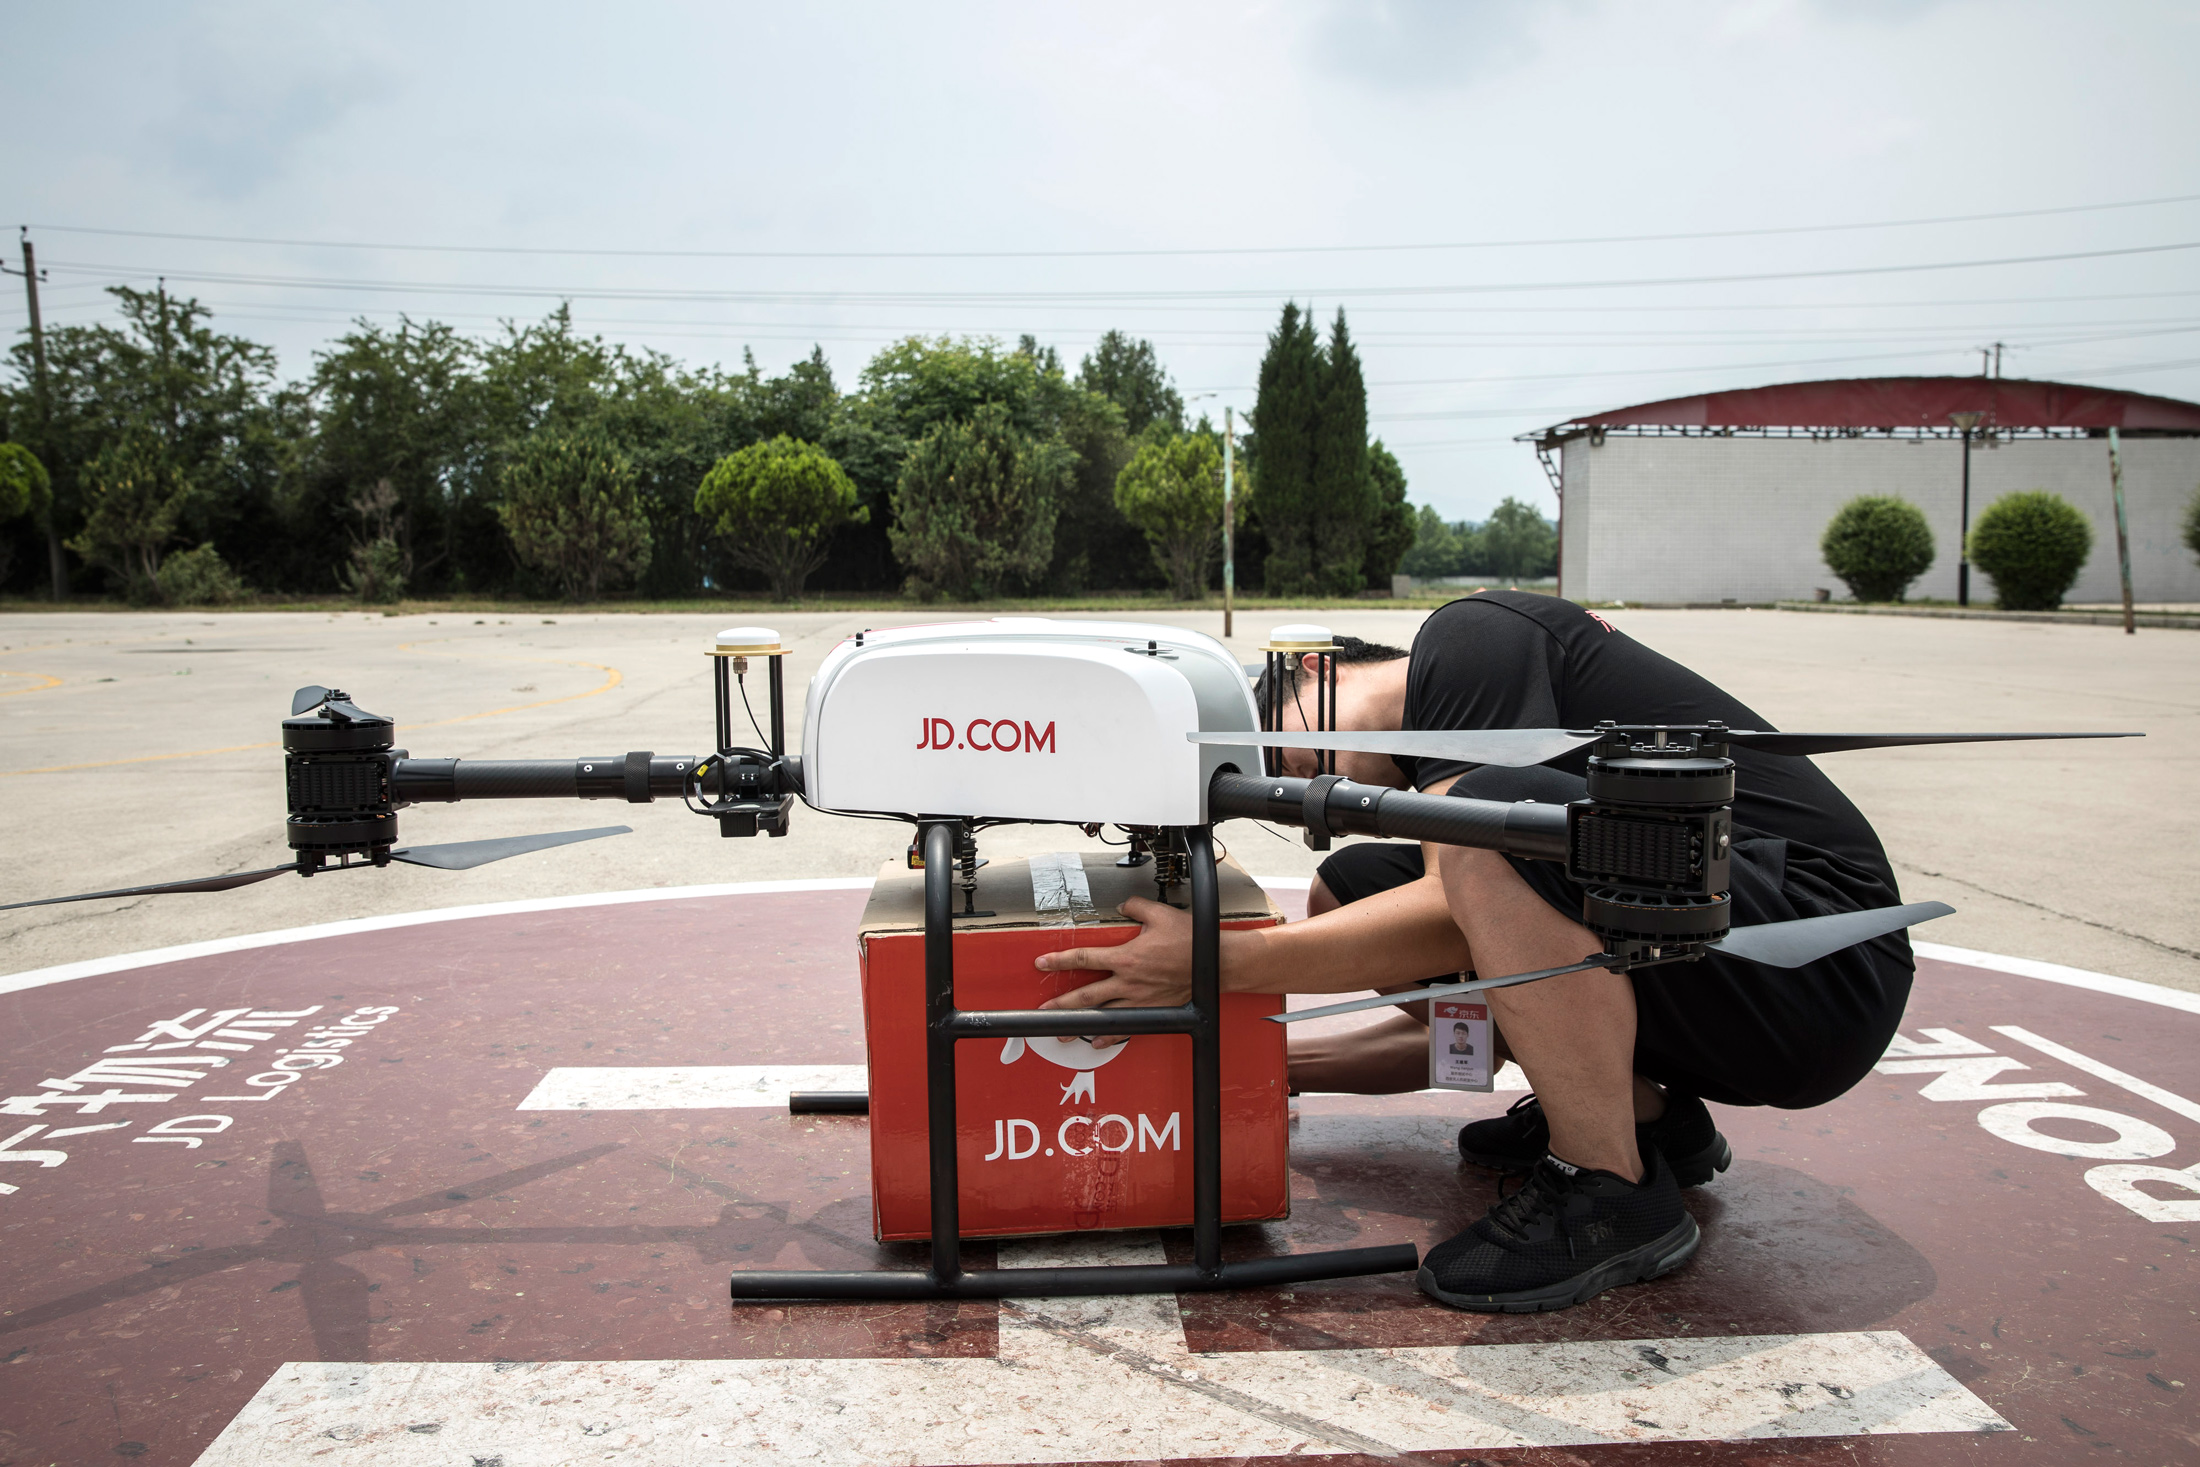 China's on the Fast Track to Making UAV Drone Deliveries - Bloomberg